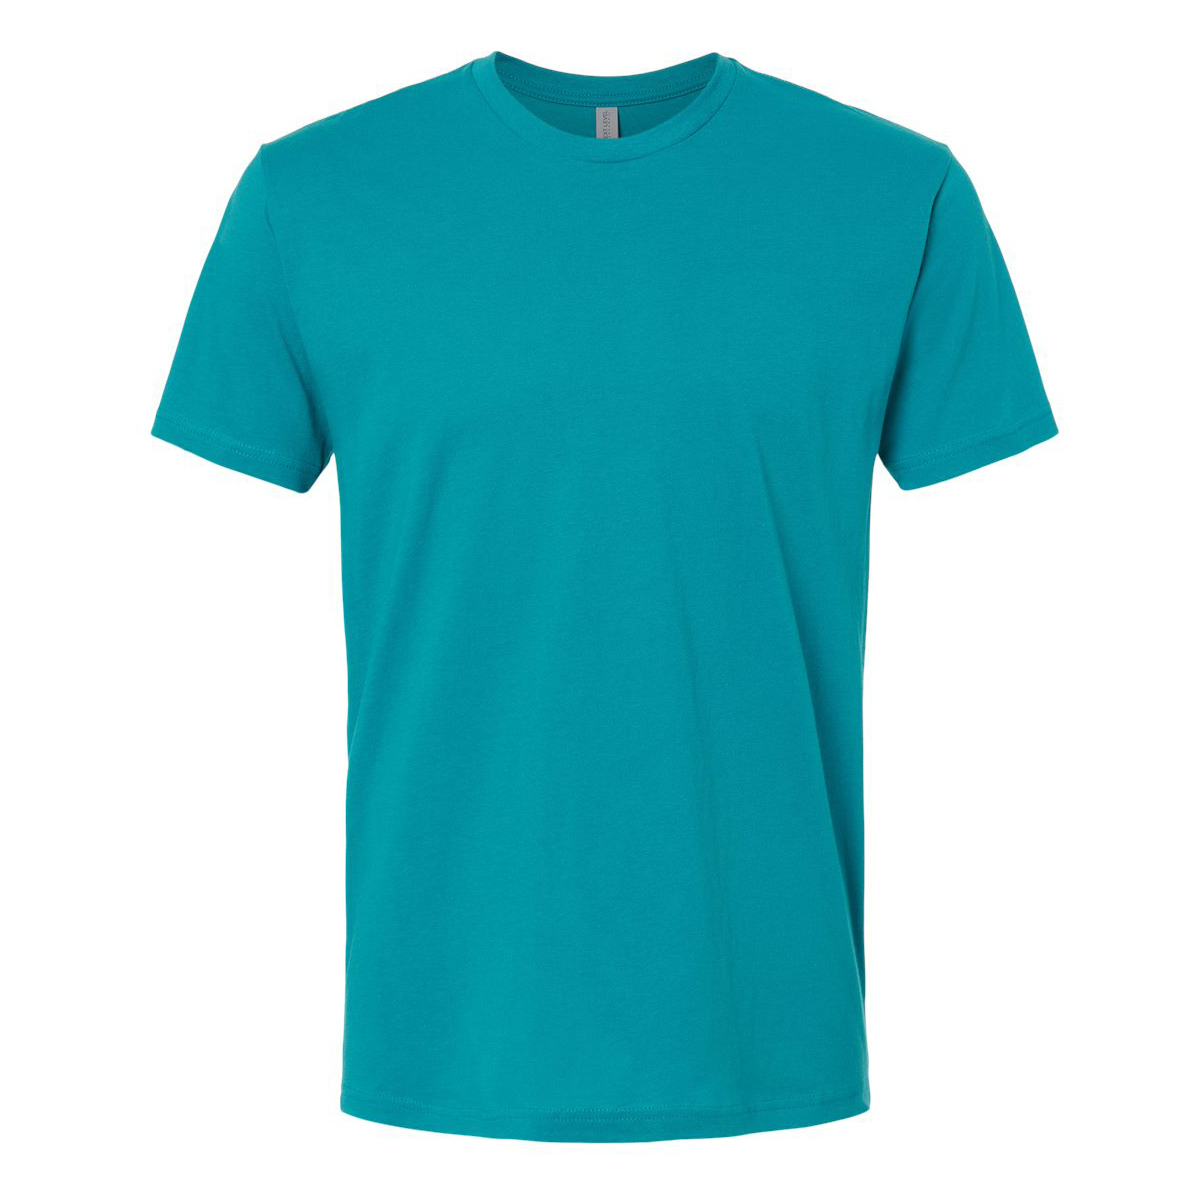 Next Level 3600 Cotton Short Sleeve Crew - Teal | Full Source